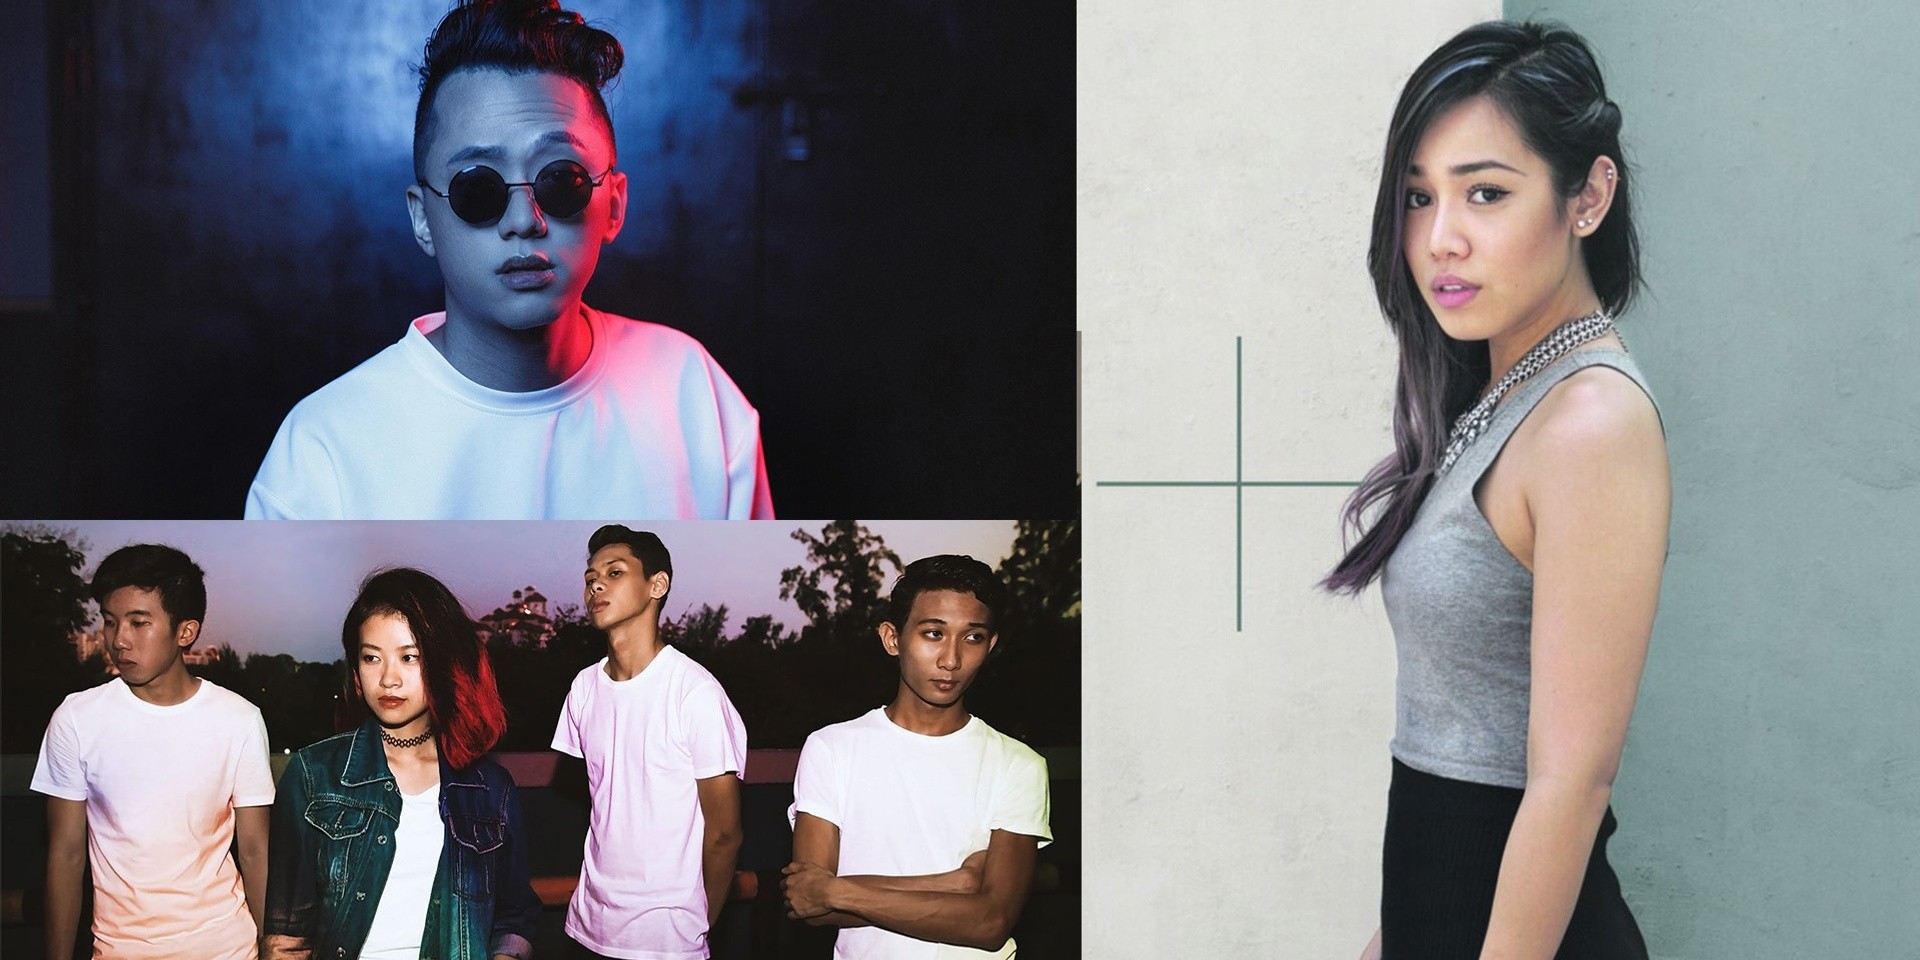 Sezairi, Gayle Nerva and Disco Hue kick off Marina Bay Sands' new concert series OPEN STAGE   